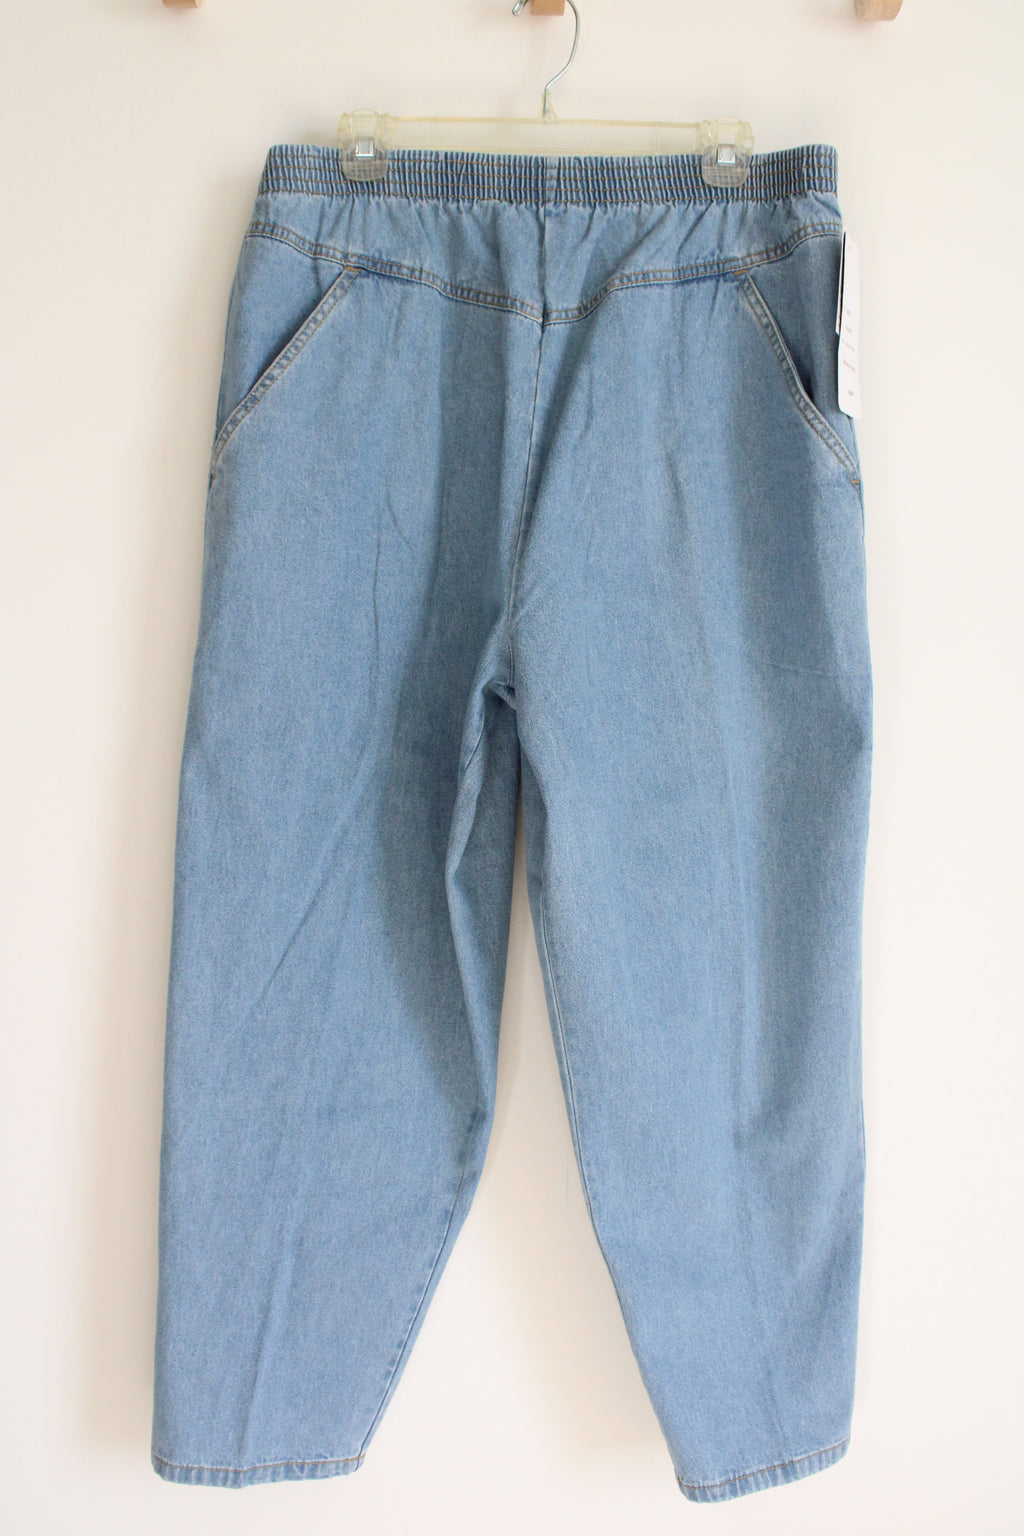 NEW Lord Isaac's Elastic Waistband Jeans | 16WP